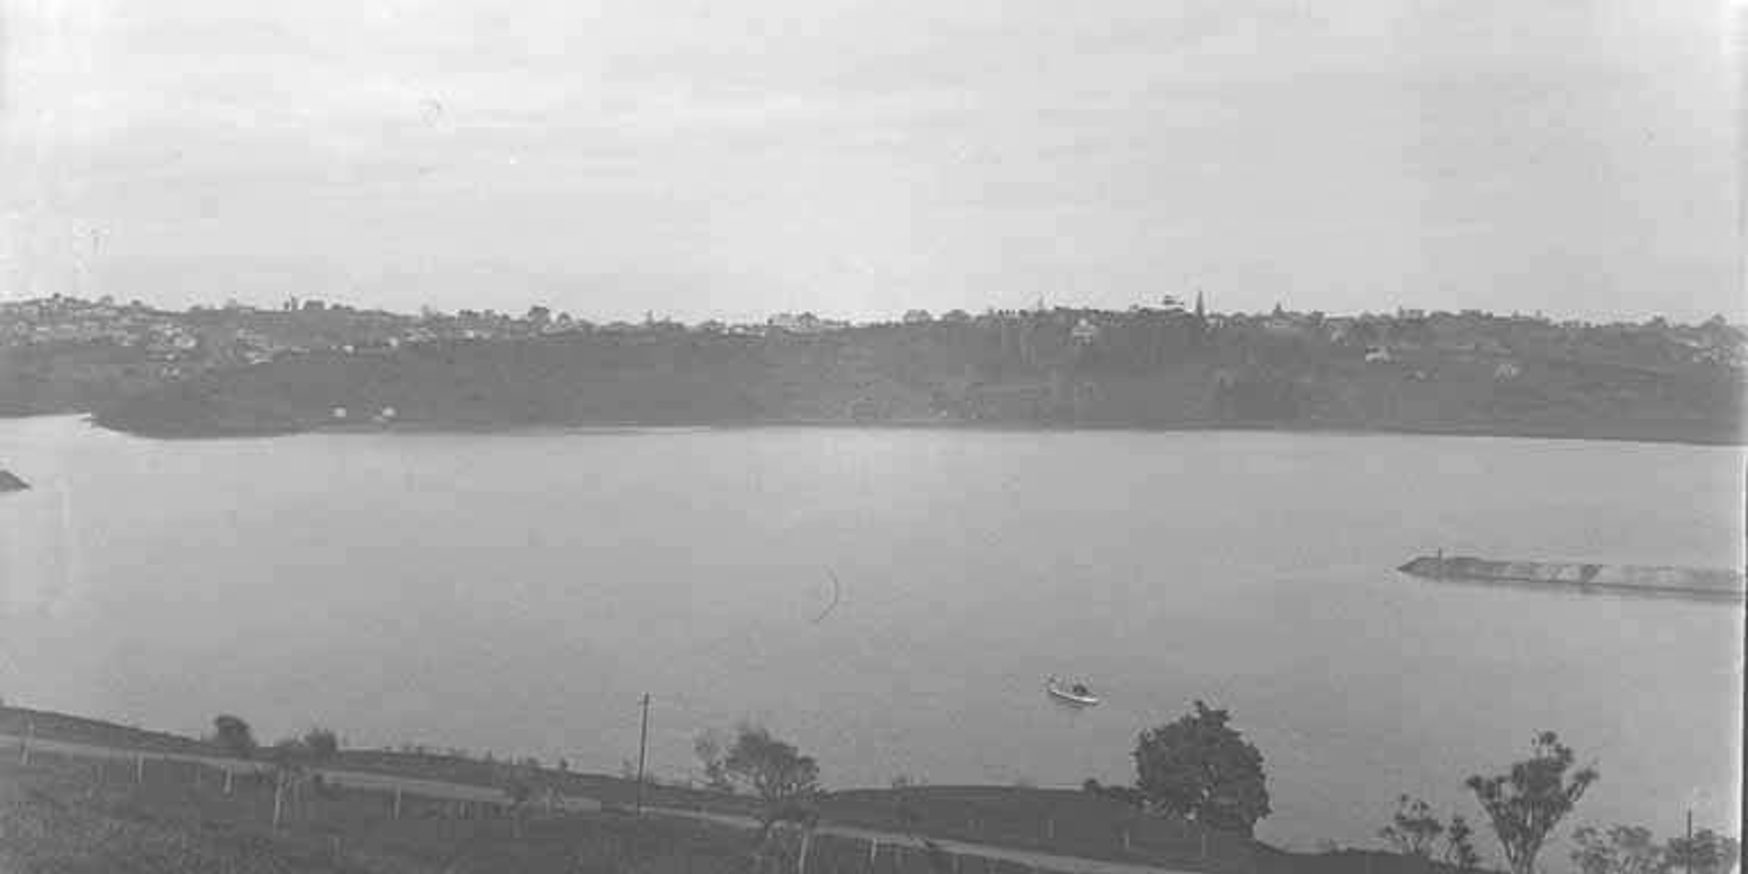 Looking south west over the Orakei Basin showing what is now Kepa Road (c. 1920)